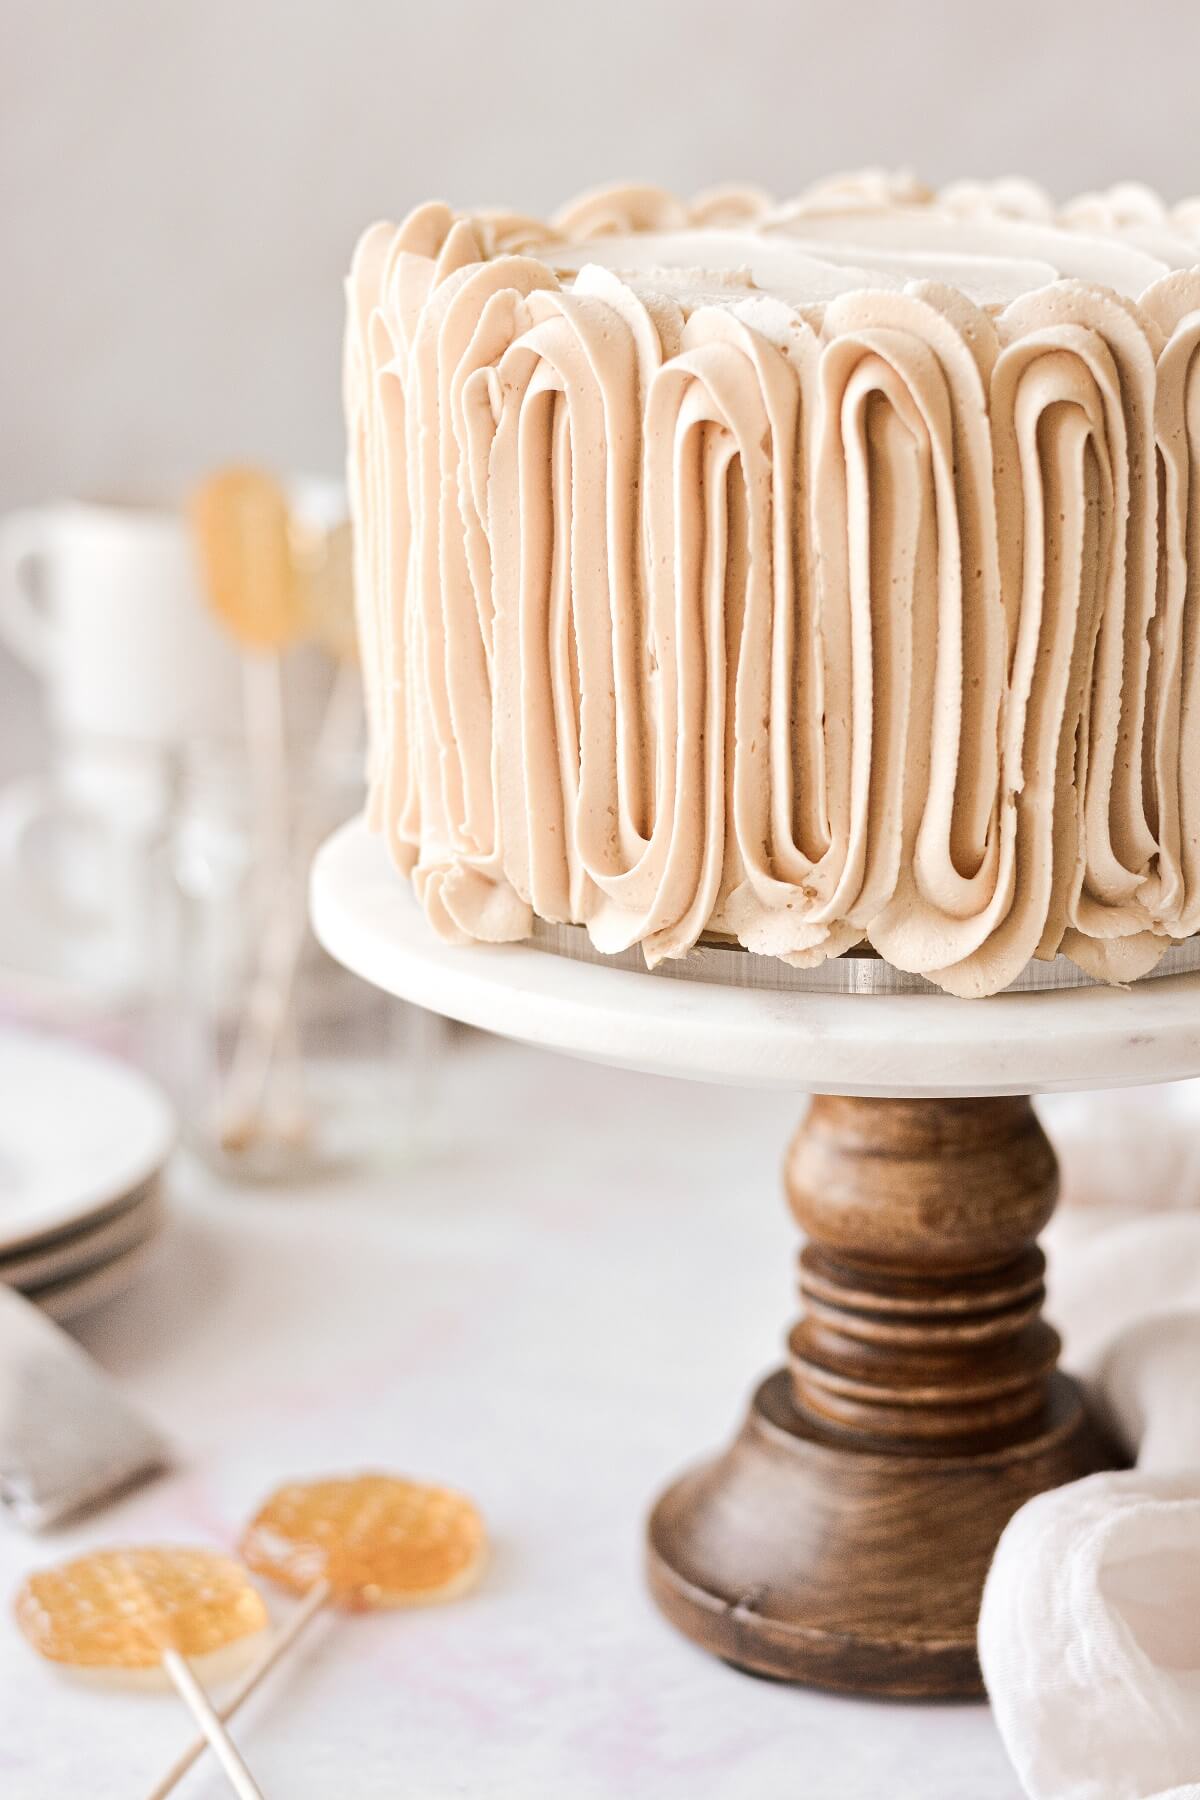 Chai tea spice cake with piped buttercream on a marble and wood cake stand.